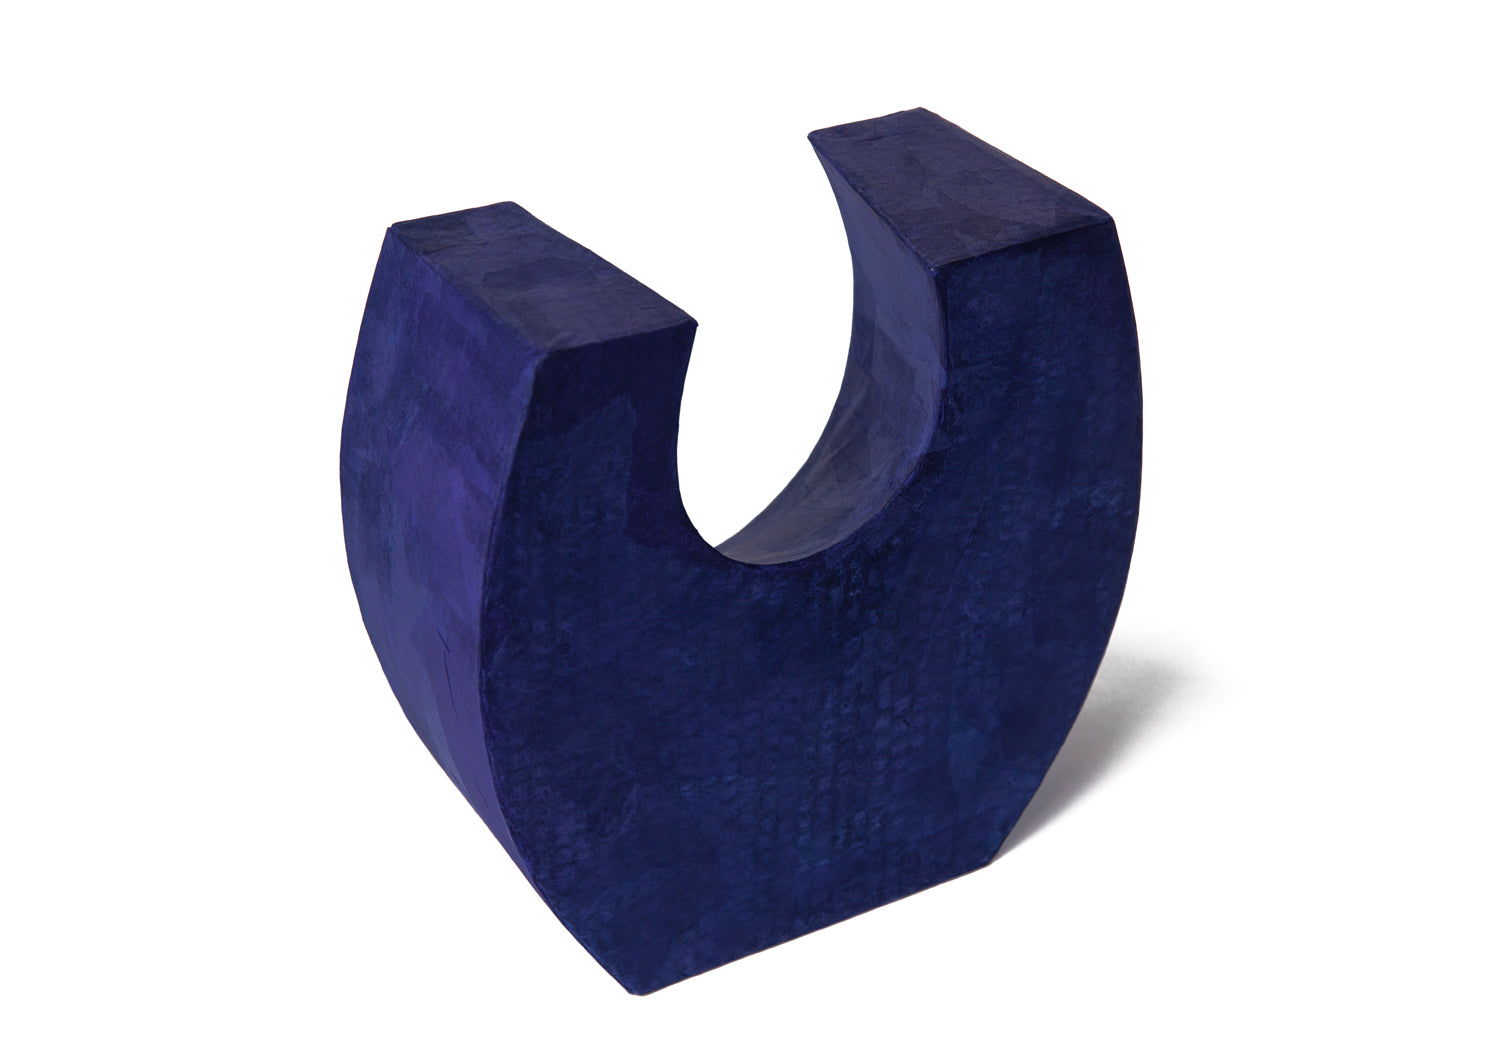 Picture of a beautiful purple horseshoe shaped biodegradable paper cremation urn on sale at Muses Design Urns. Back view.